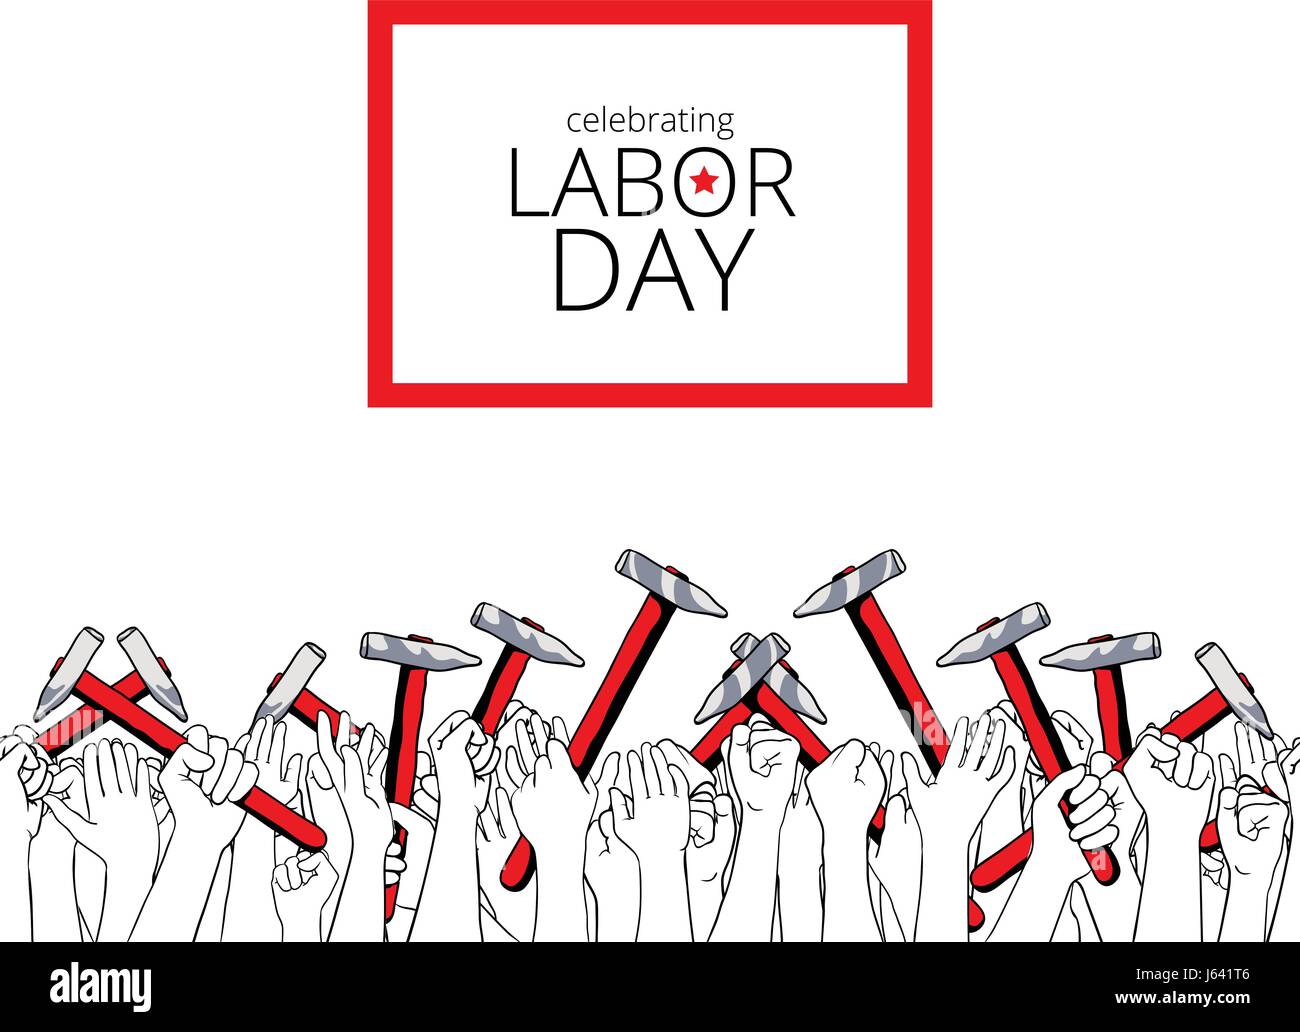 Celebrating Labor Day, september 4, 2017. Greeting card, also suitable for poster print. Crowd of workers with their arms raised holding hammers. Hand Stock Vector